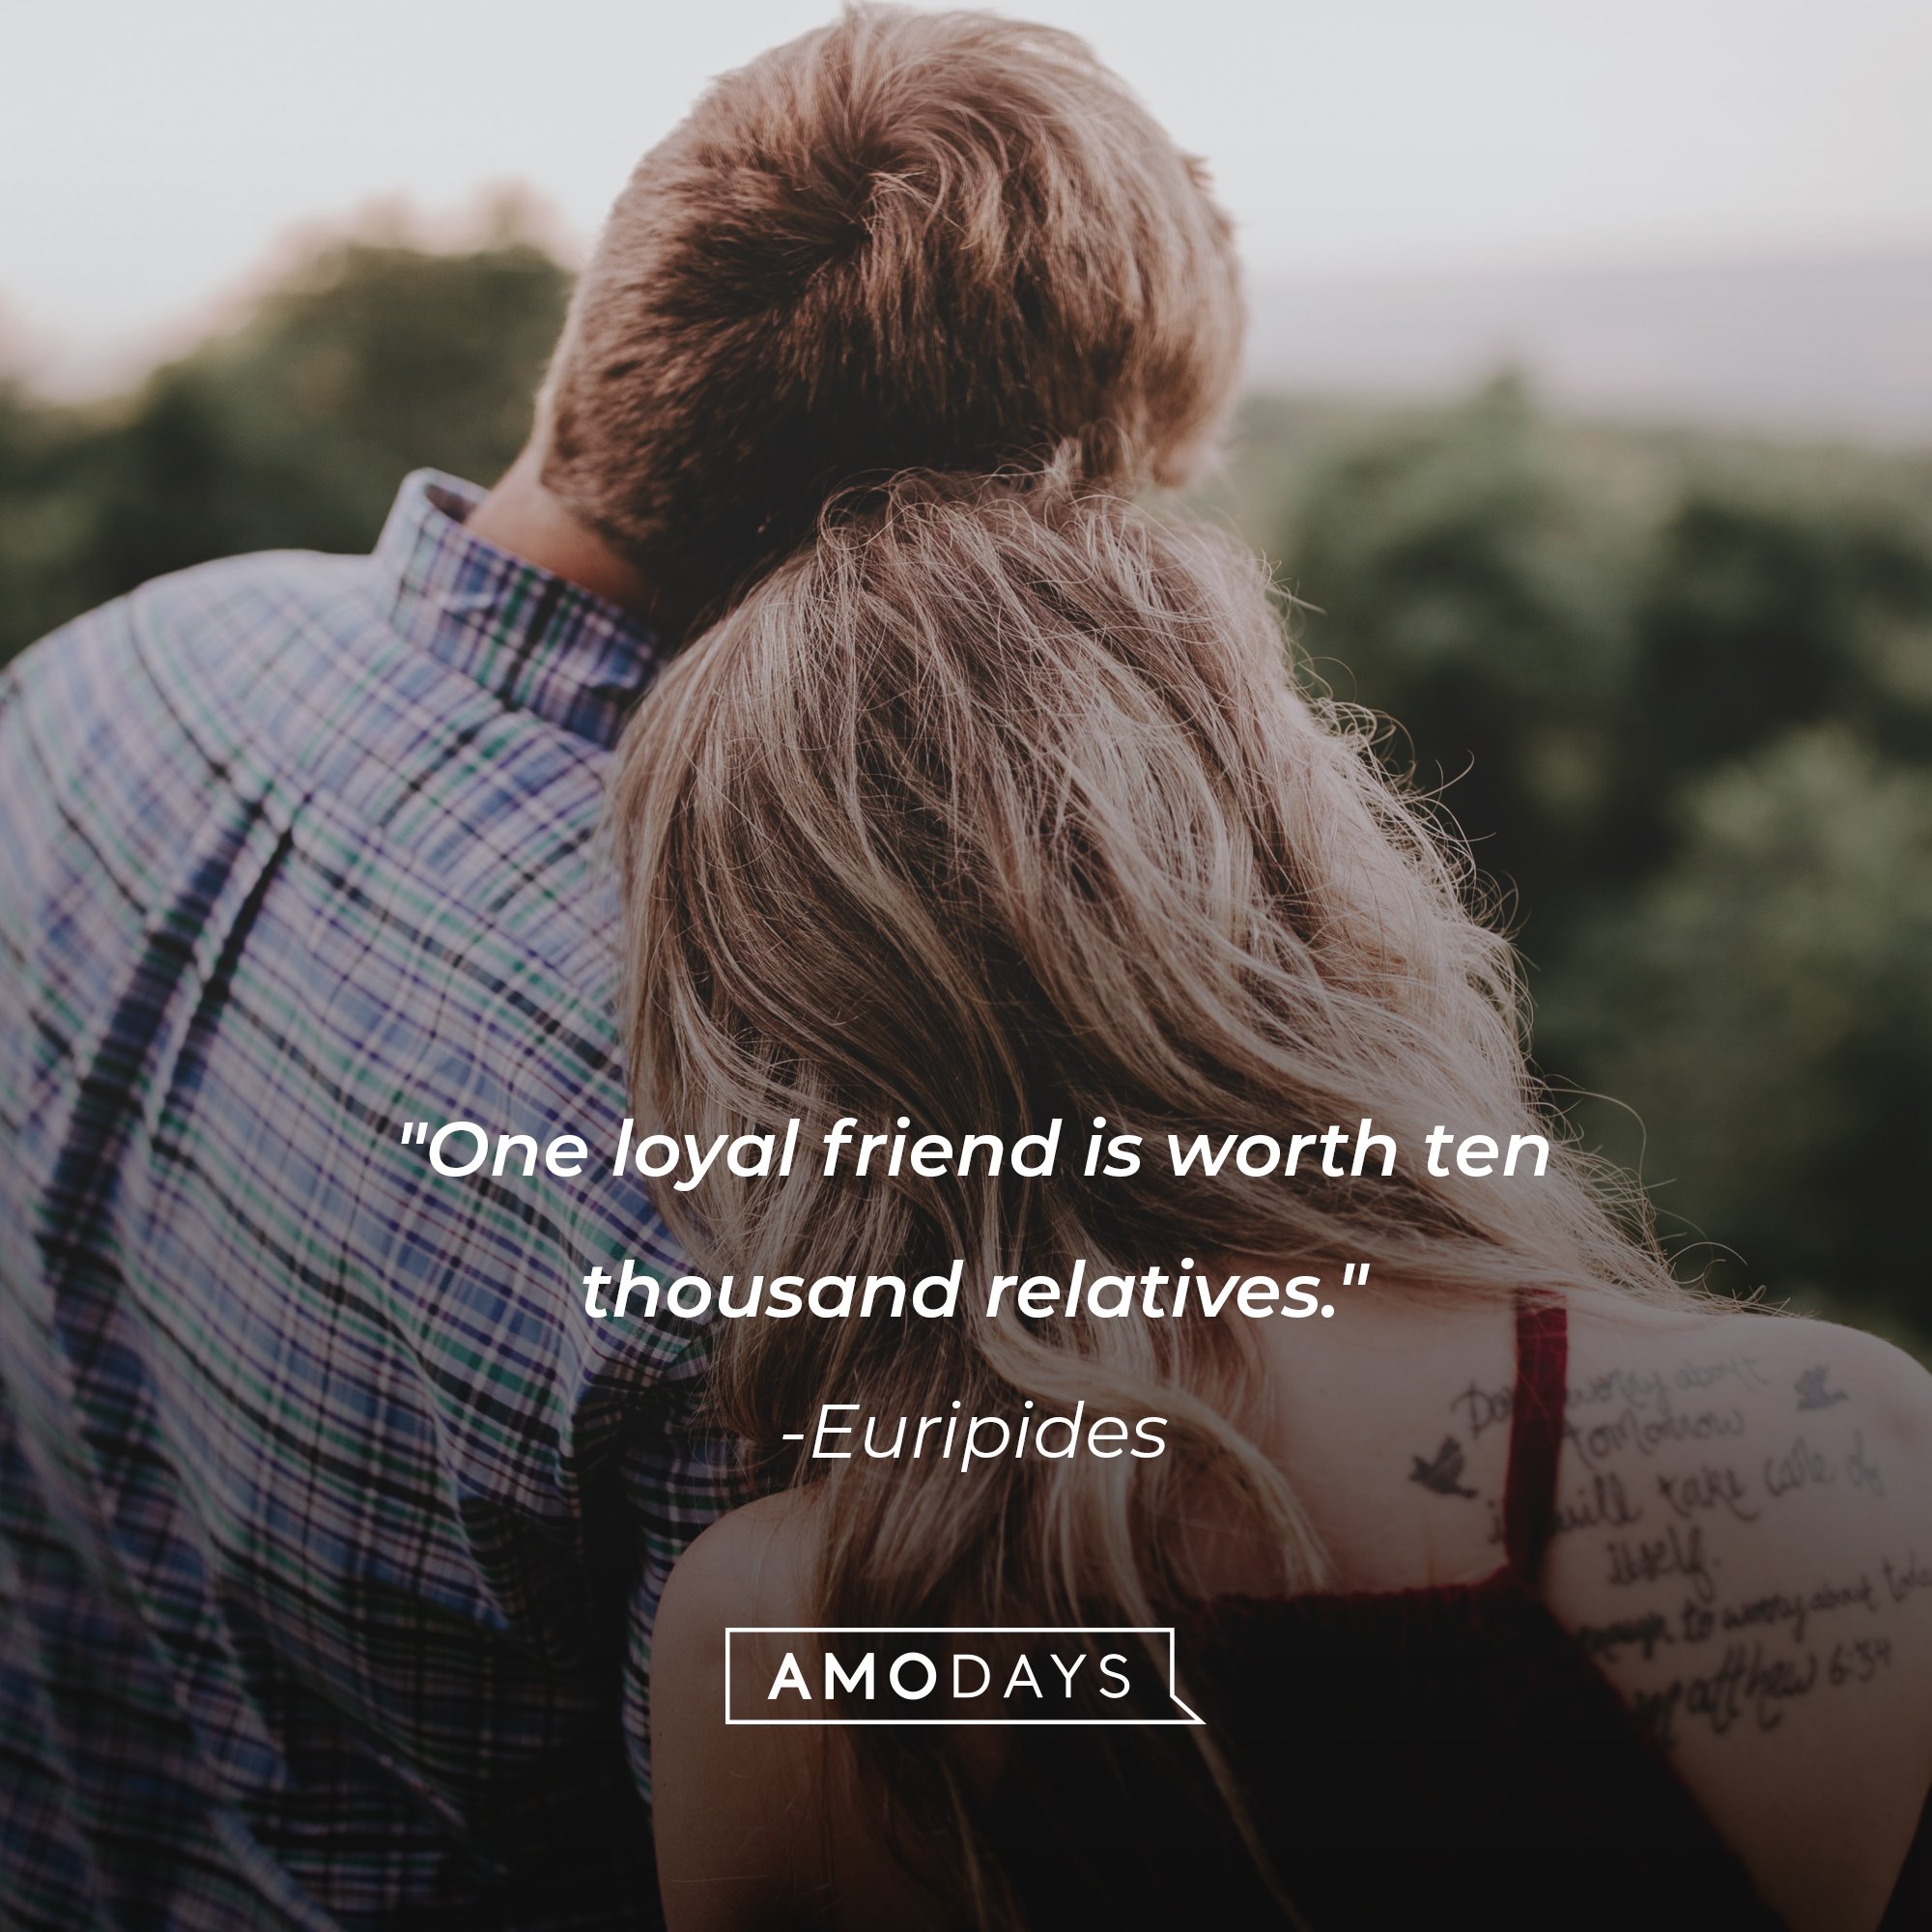 Euripides’ quote: "One loyal friend is worth ten thousand relatives.” | Image: AmoDays 